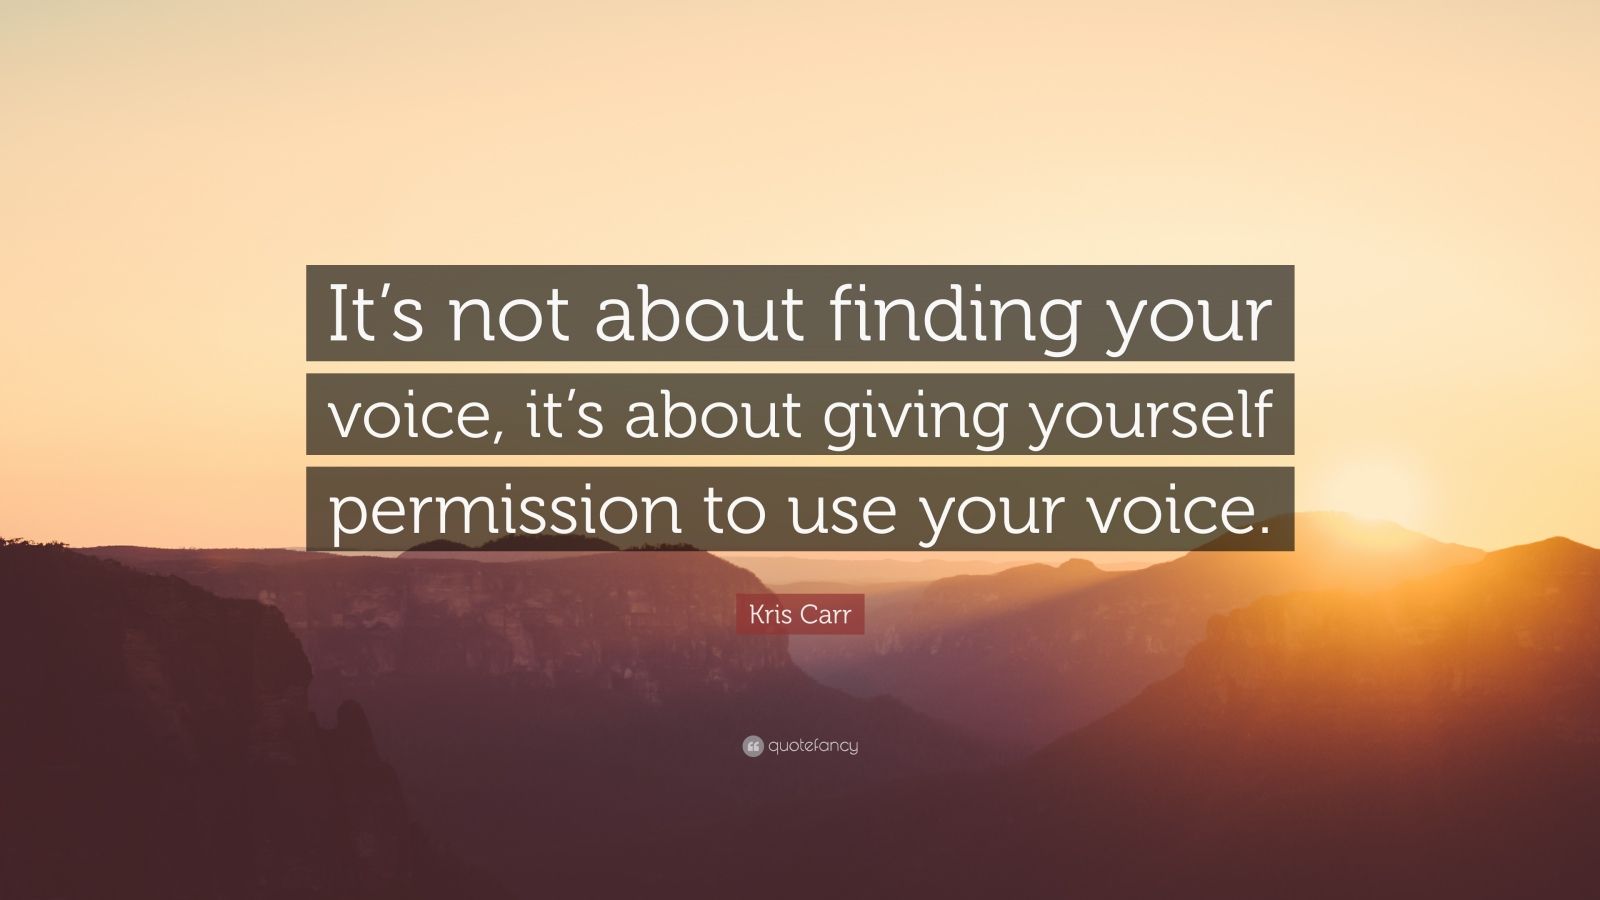 Kris Carr Quote: “It’s not about finding your voice, it’s about giving